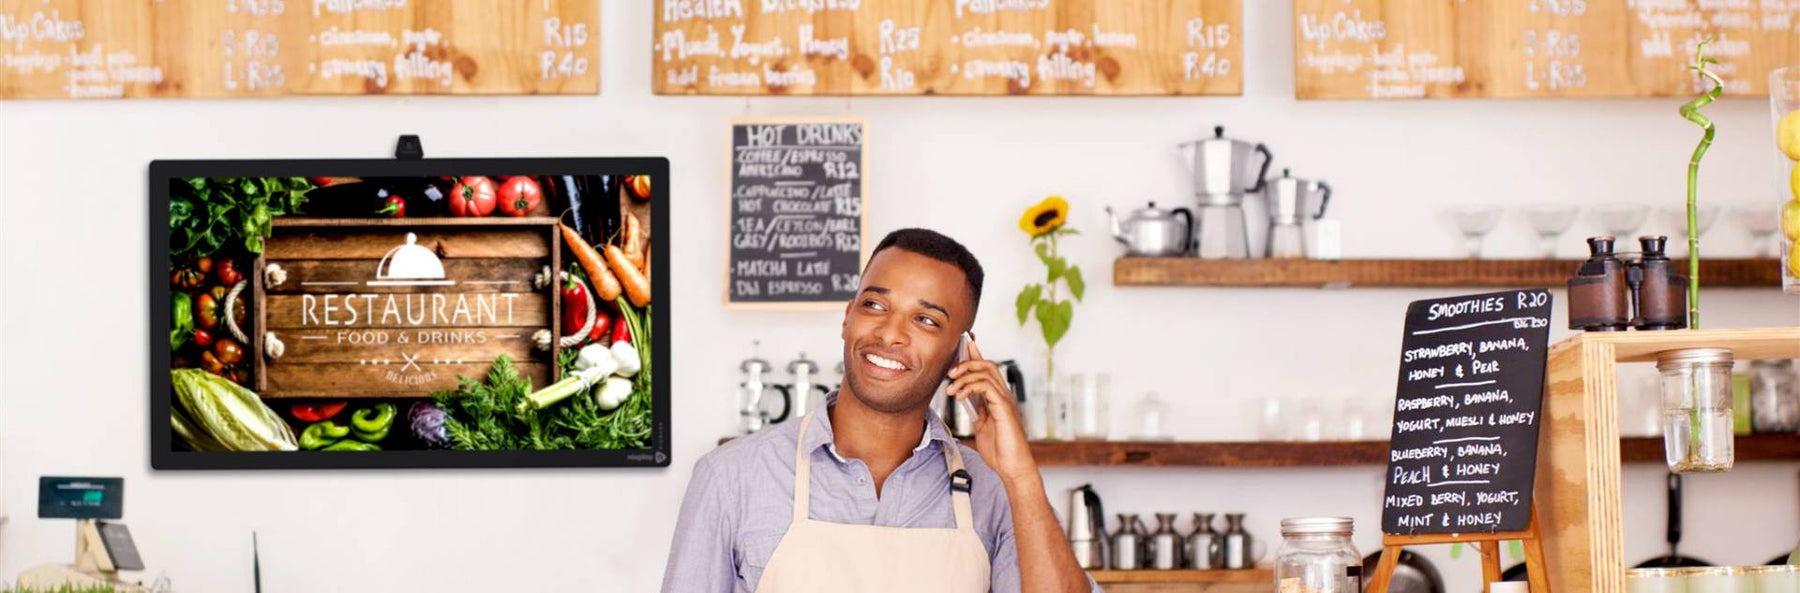 How Restaurants Can Use Digital Signage In The New Normal